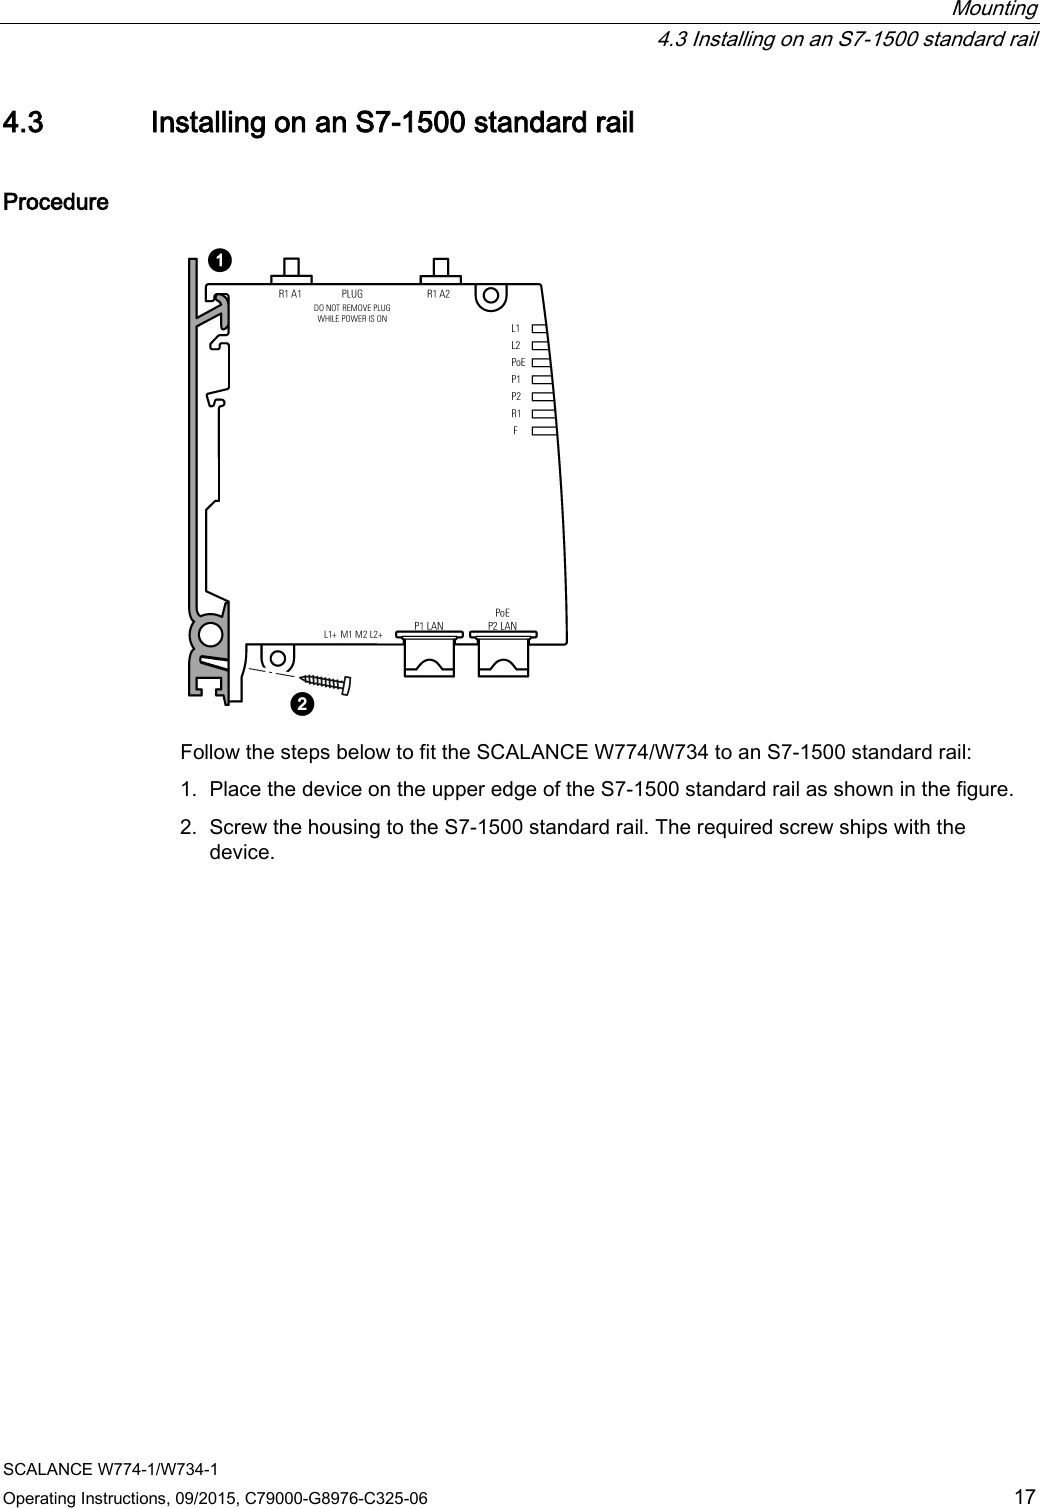  Mounting  4.3 Installing on an S7-1500 standard rail SCALANCE W774-1/W734-1 Operating Instructions, 09/2015, C79000-G8976-C325-06 17 4.3 Installing on an S7-1500 standard rail Procedure  Follow the steps below to fit the SCALANCE W774/W734 to an S7-1500 standard rail: 1. Place the device on the upper edge of the S7-1500 standard rail as shown in the figure. 2. Screw the housing to the S7-1500 standard rail. The required screw ships with the device.  